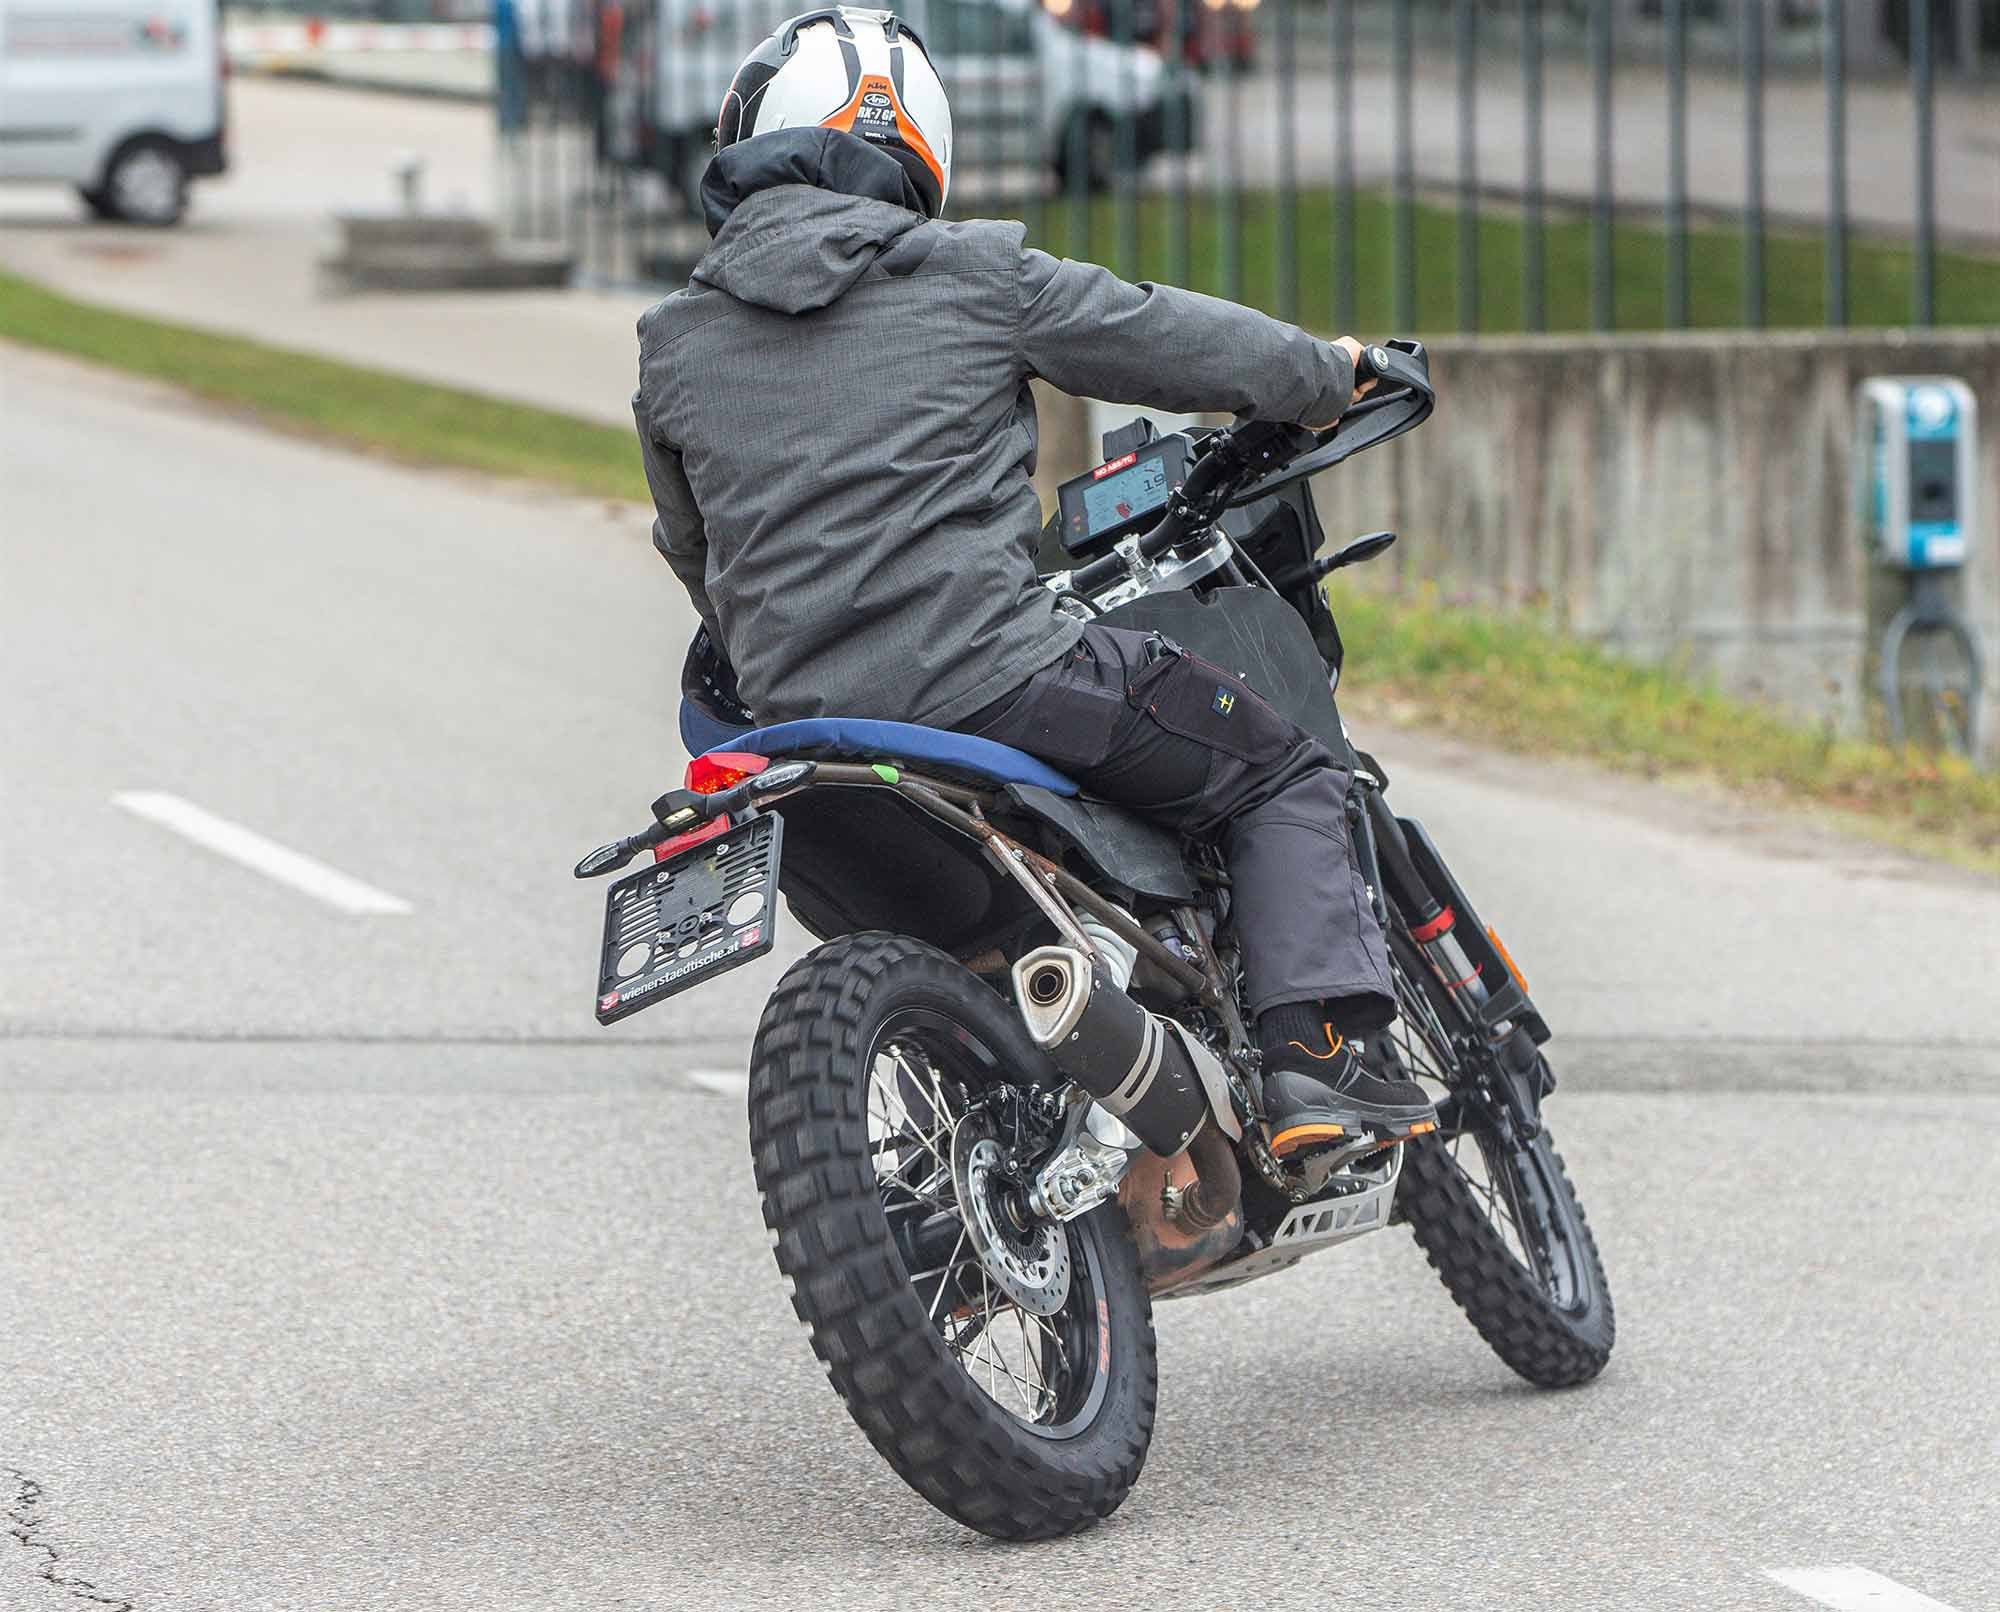 The 21-inch front and 18-inch rear wire wheels suggest either a new 390 Adventure or perhaps a 390 Enduro.